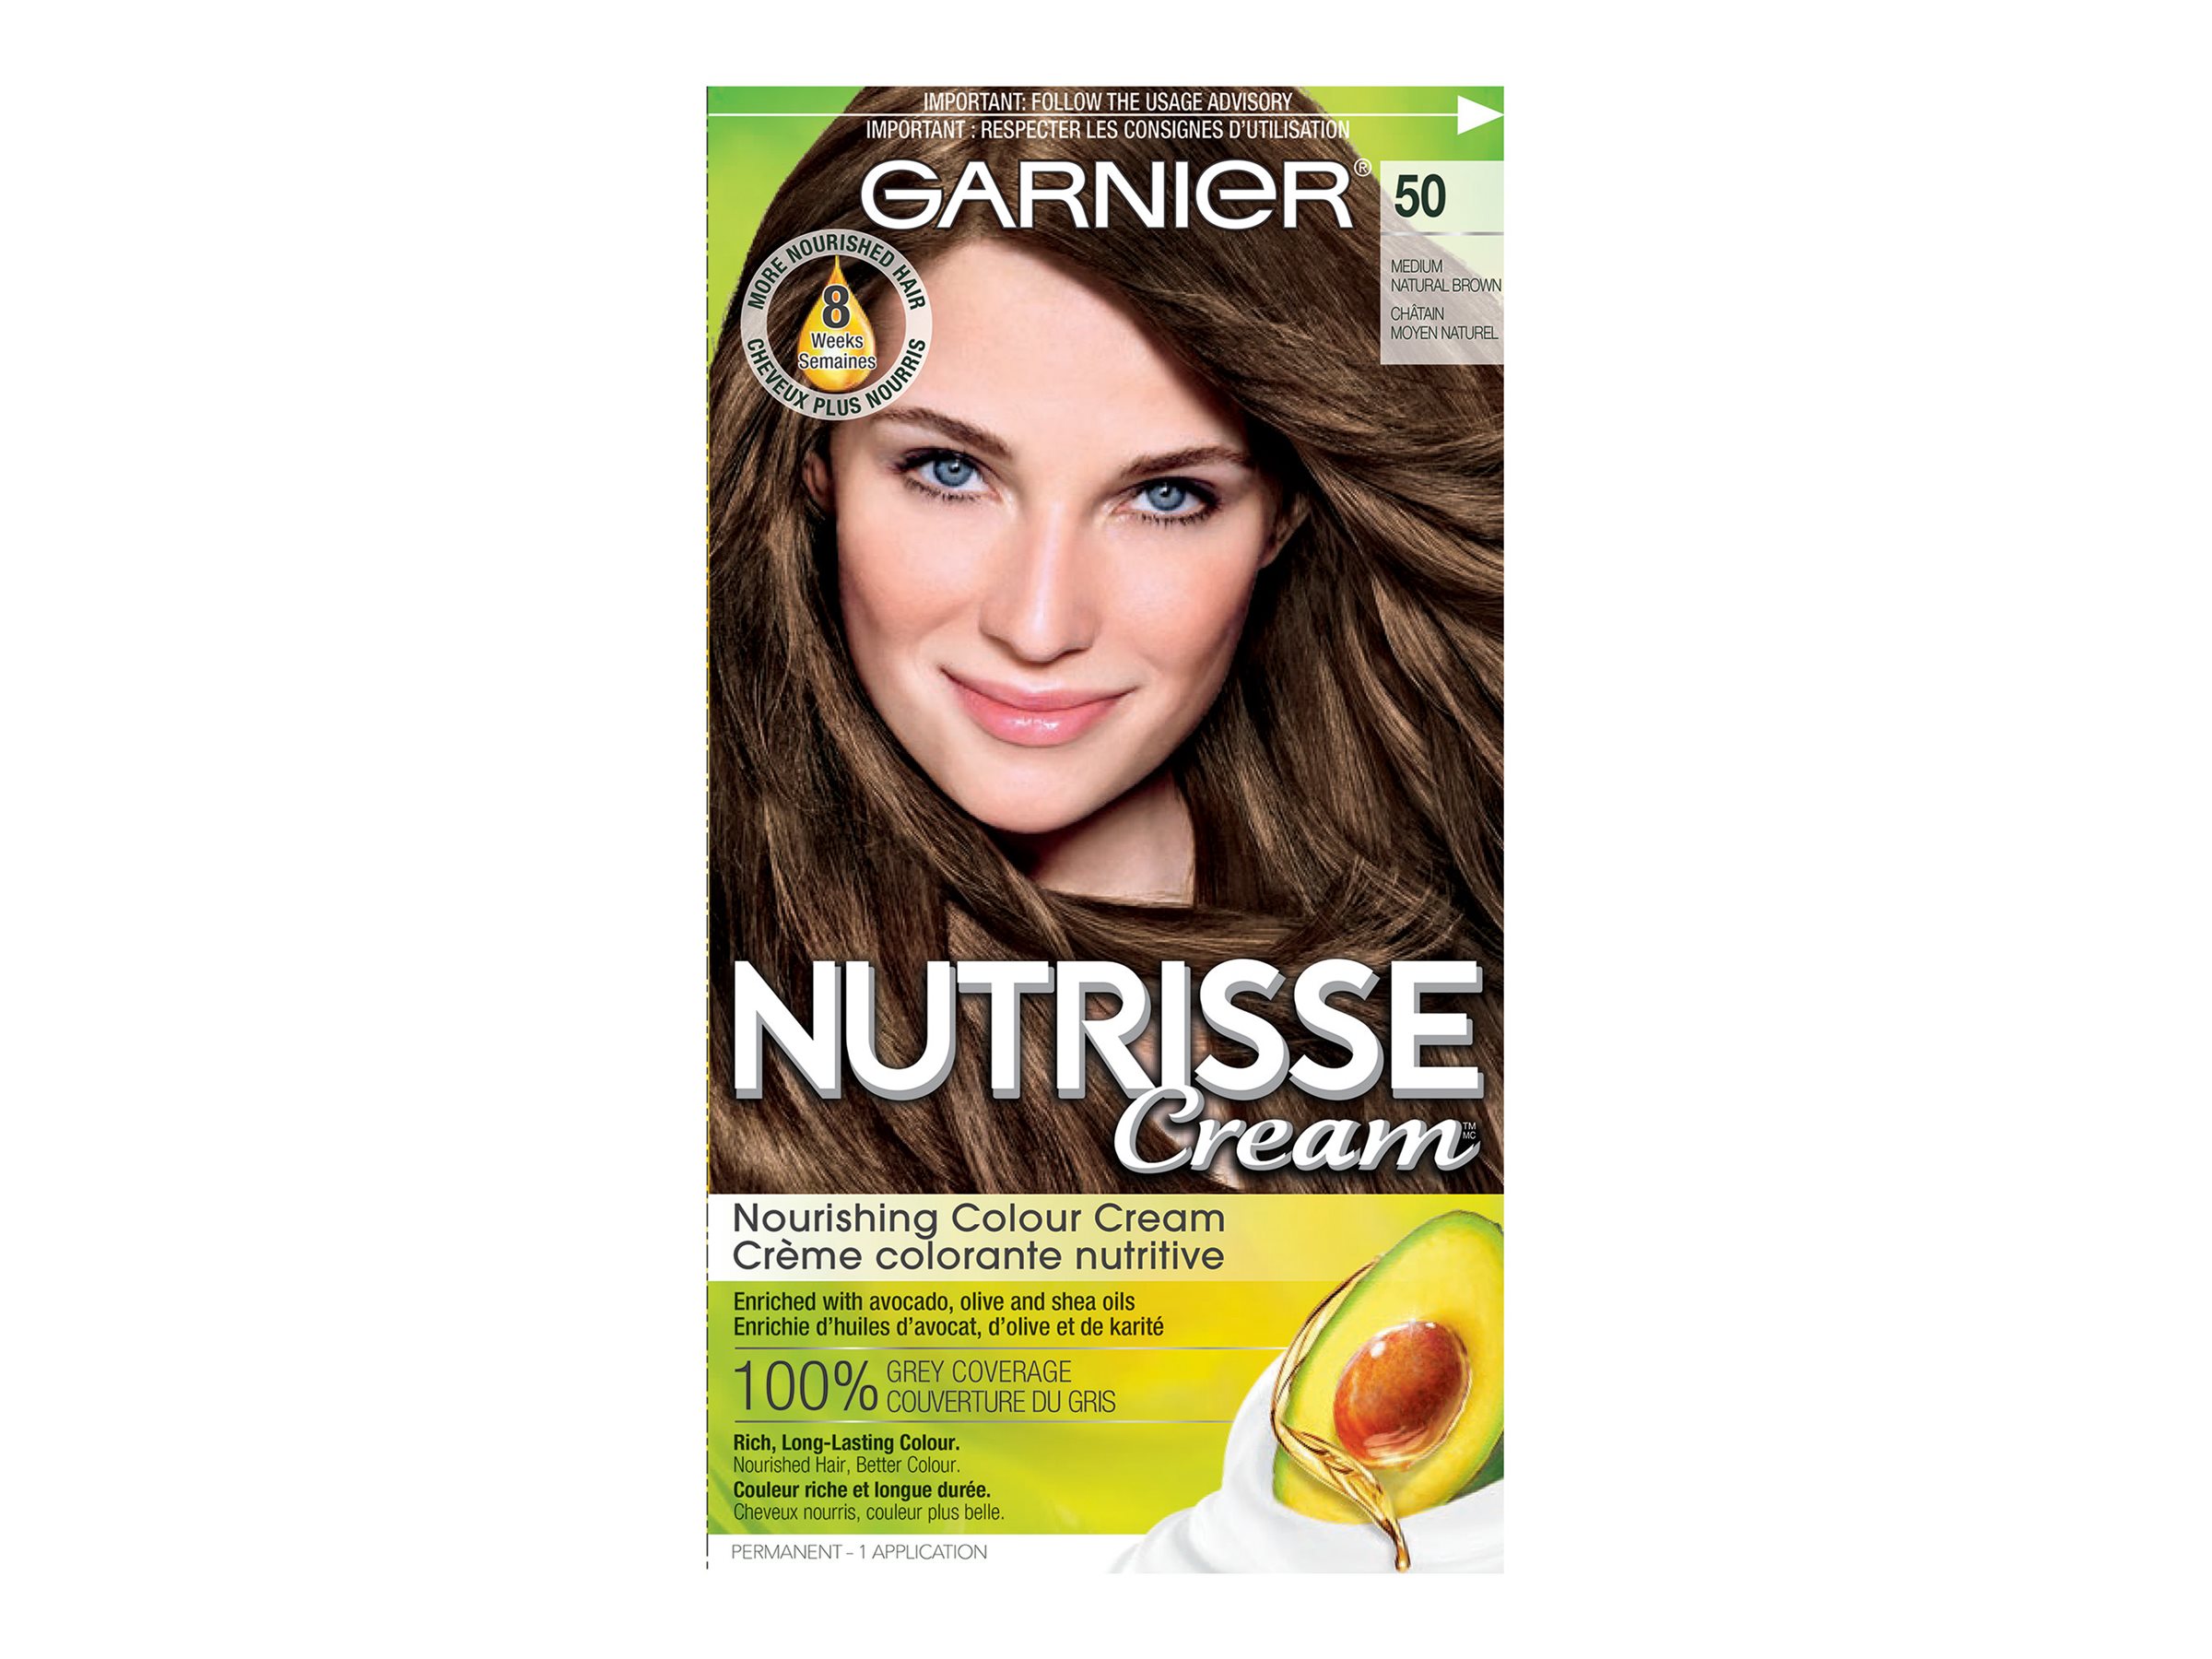 Garnier Nutrisse Ultra Color, Permanent Hair Colour, 260 Black Cherry, 100%  Grey Coverage, Nourished Hair Enriched With Avocado Oil, 1 Application :  : Beauty & Personal Care